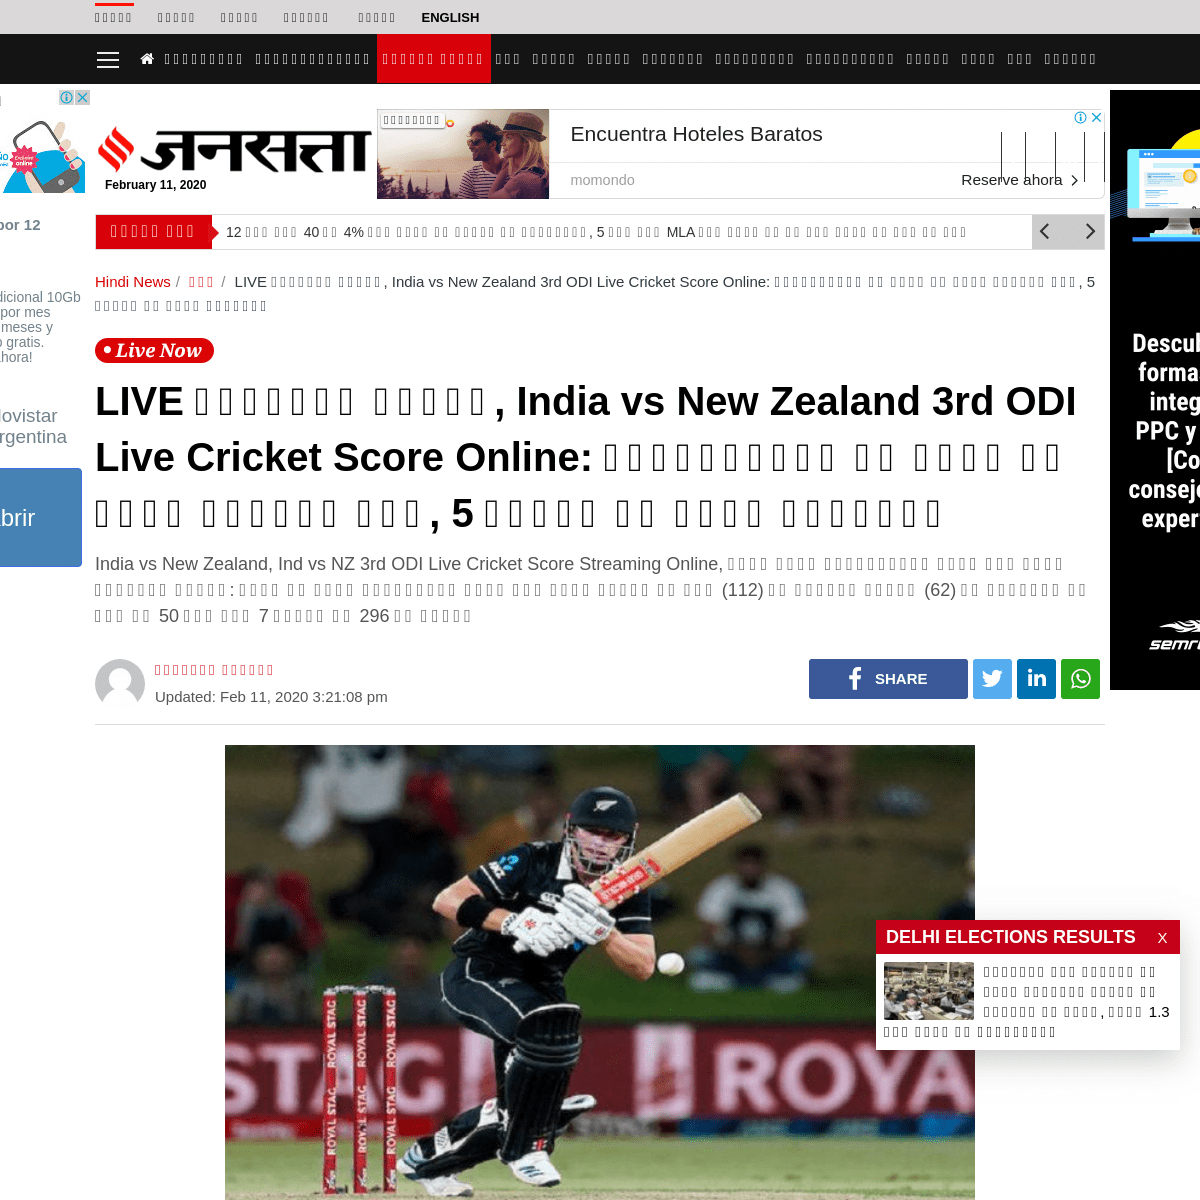 A complete backup of www.jansatta.com/khel/india-vs-new-zealand-3rd-odi-live-cricket-score-streaming-online-know-ball-ball-comme